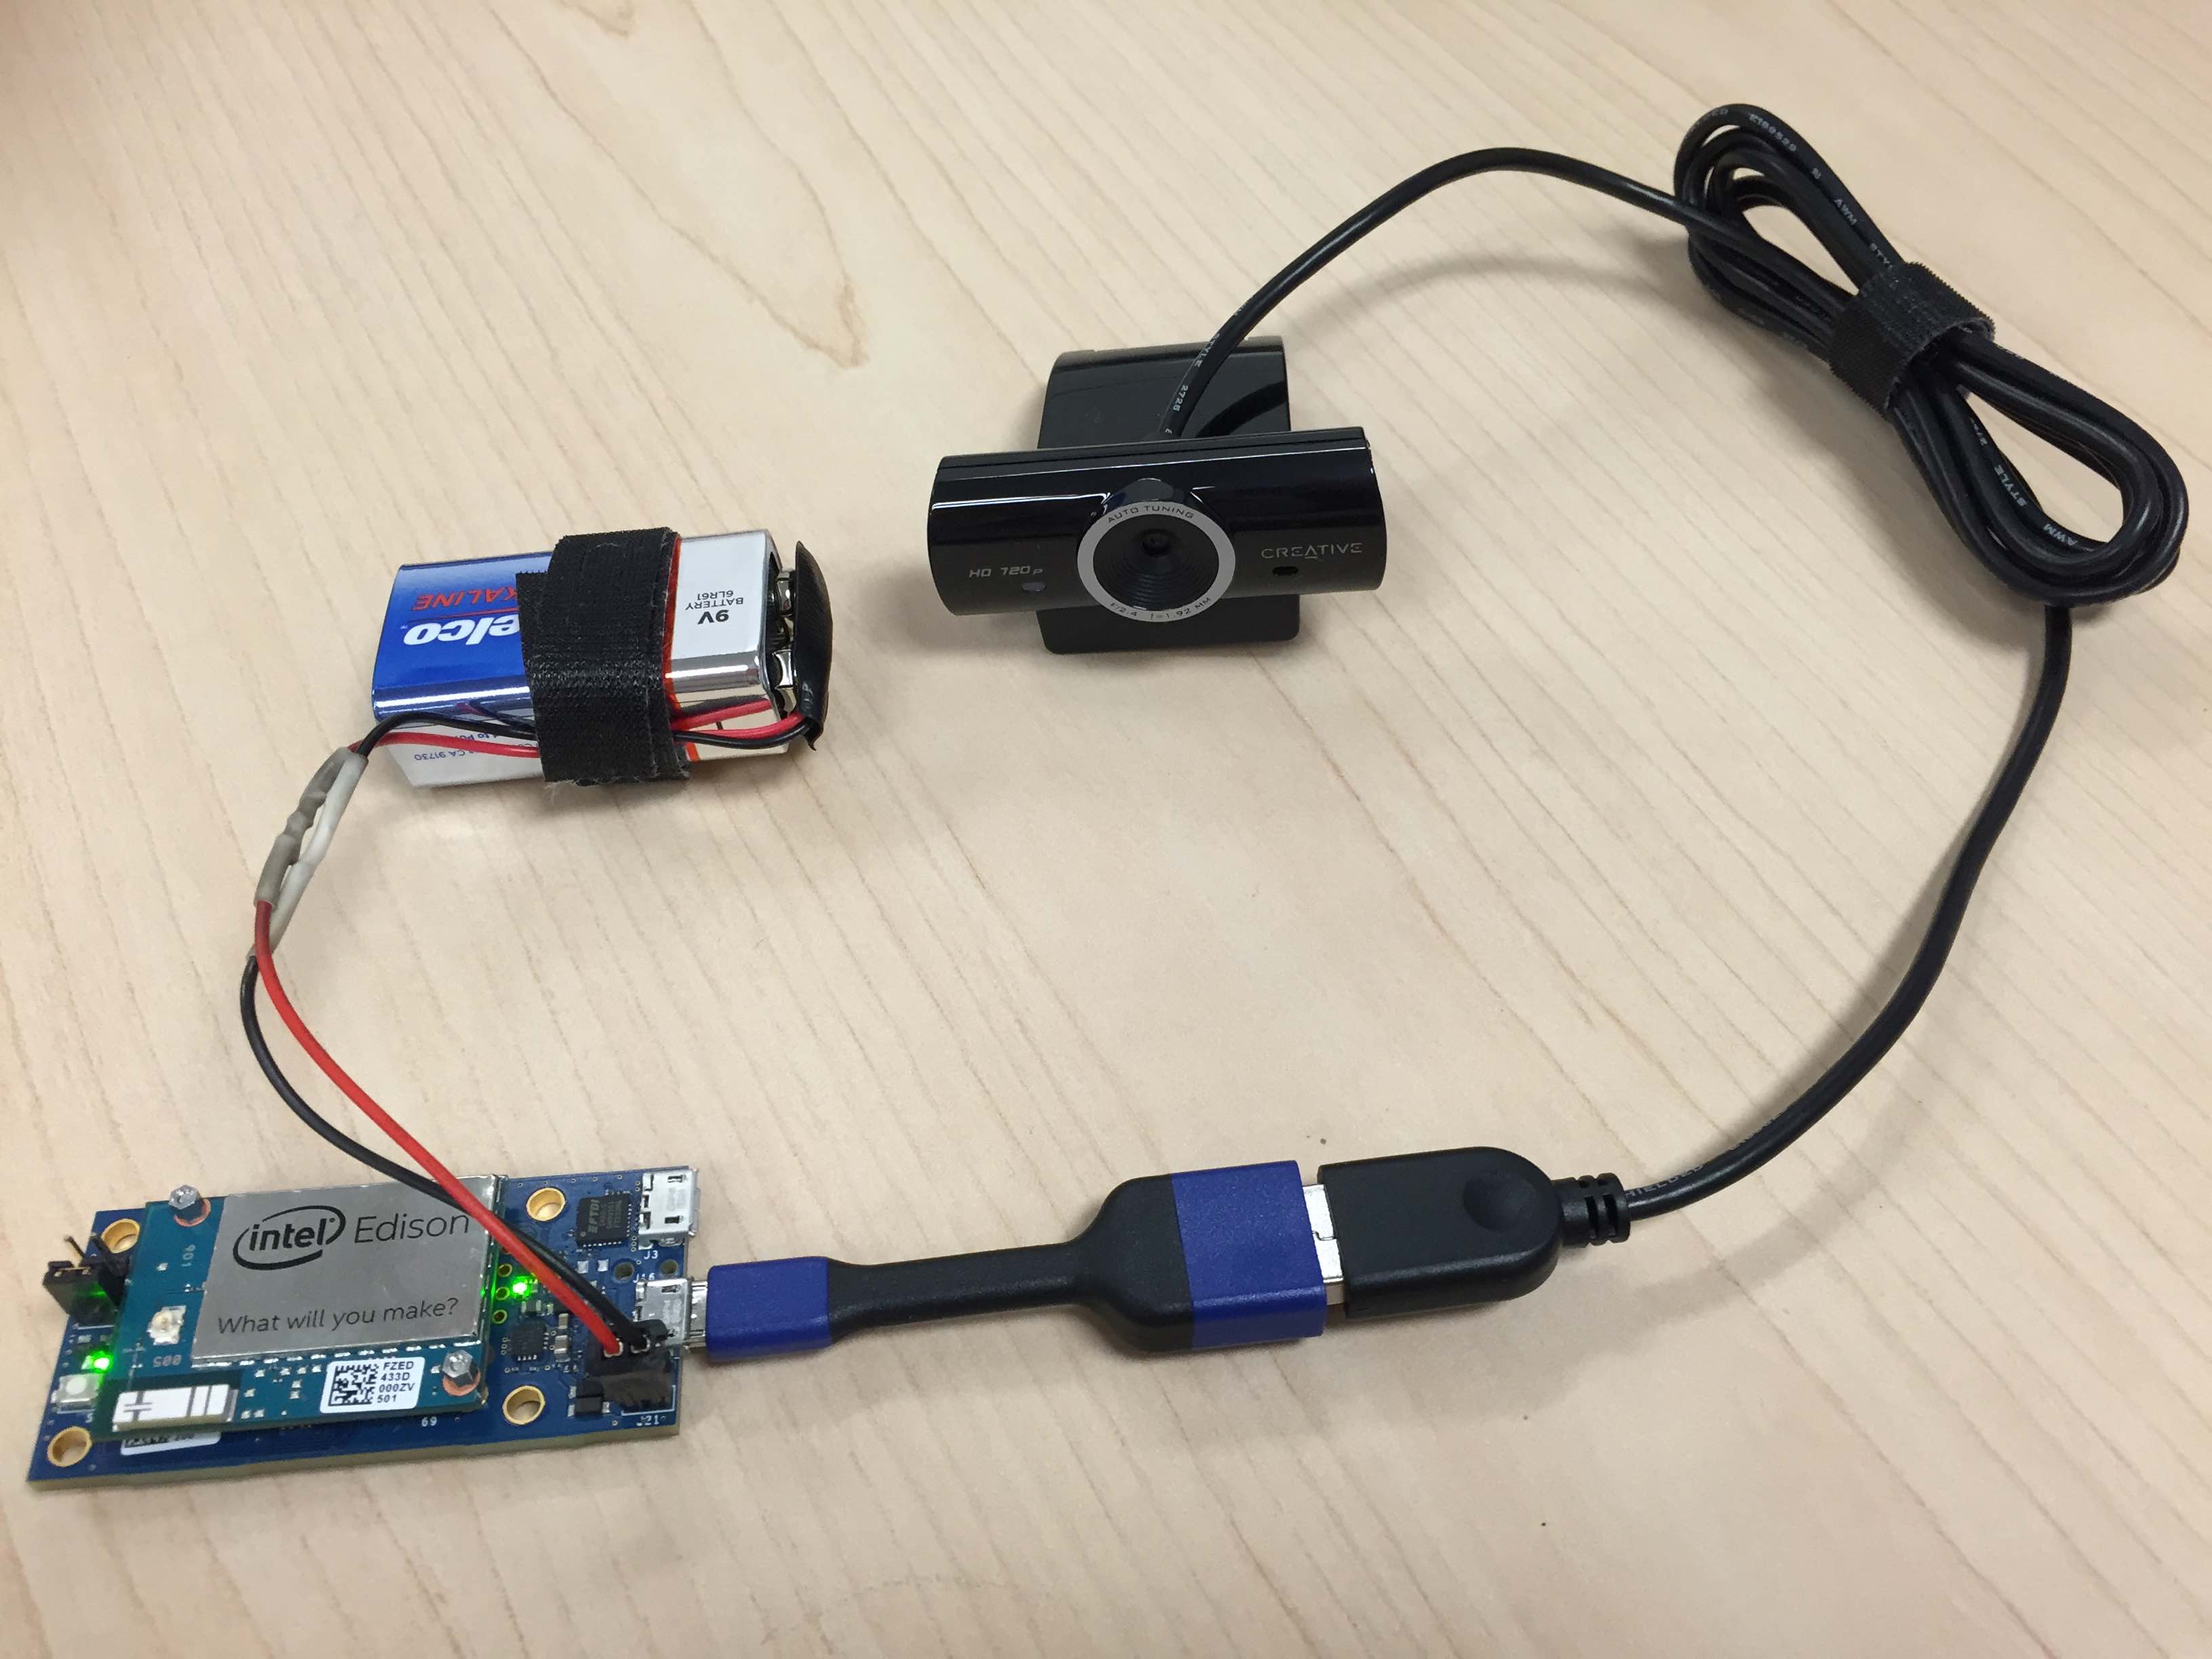 9V battery and webcam connected to the Edison Mini breakout board